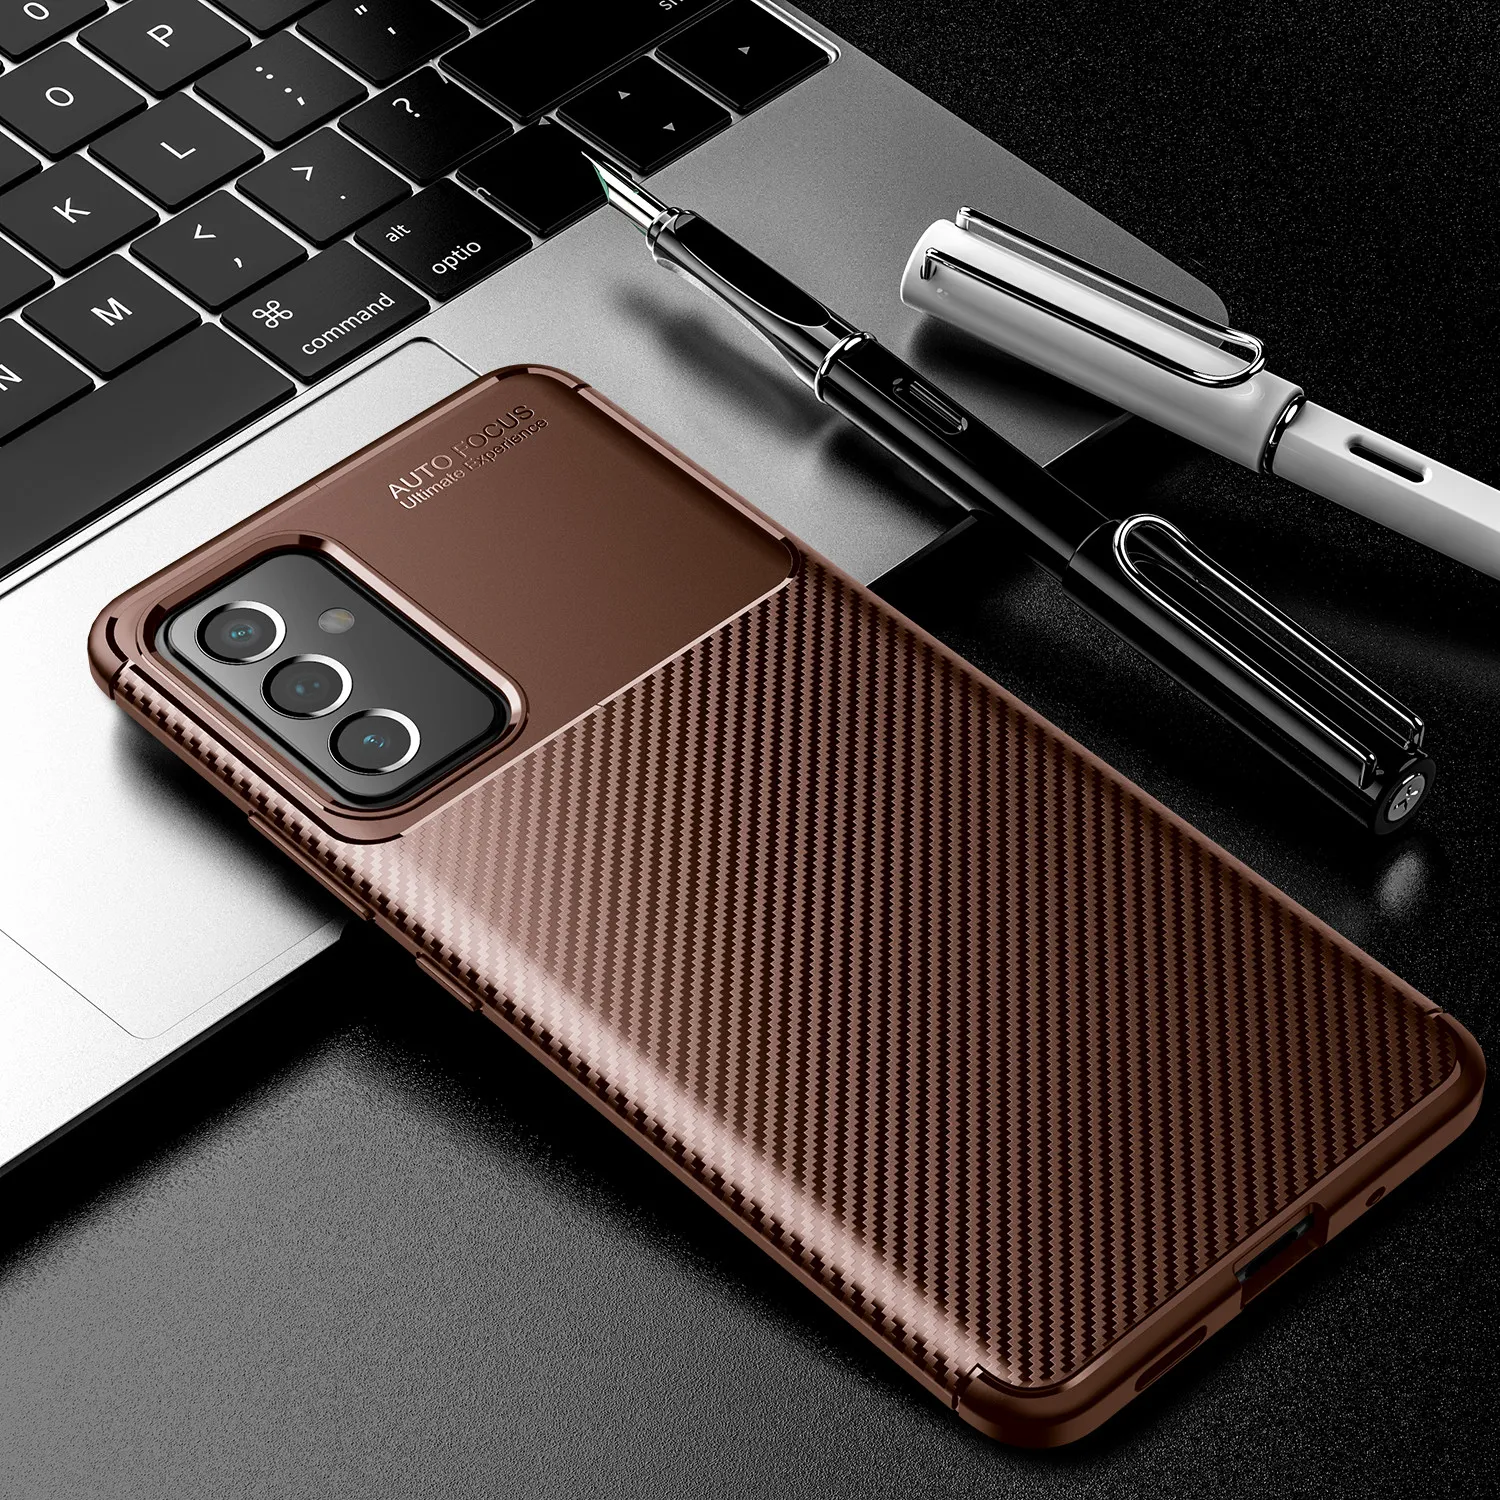 Luxury Carbon Fiber Shockproof Cases For Samsung Galaxy A82 5G Soft TPU Silicone Bumper Protective Back Cover Capa Coque Fundas